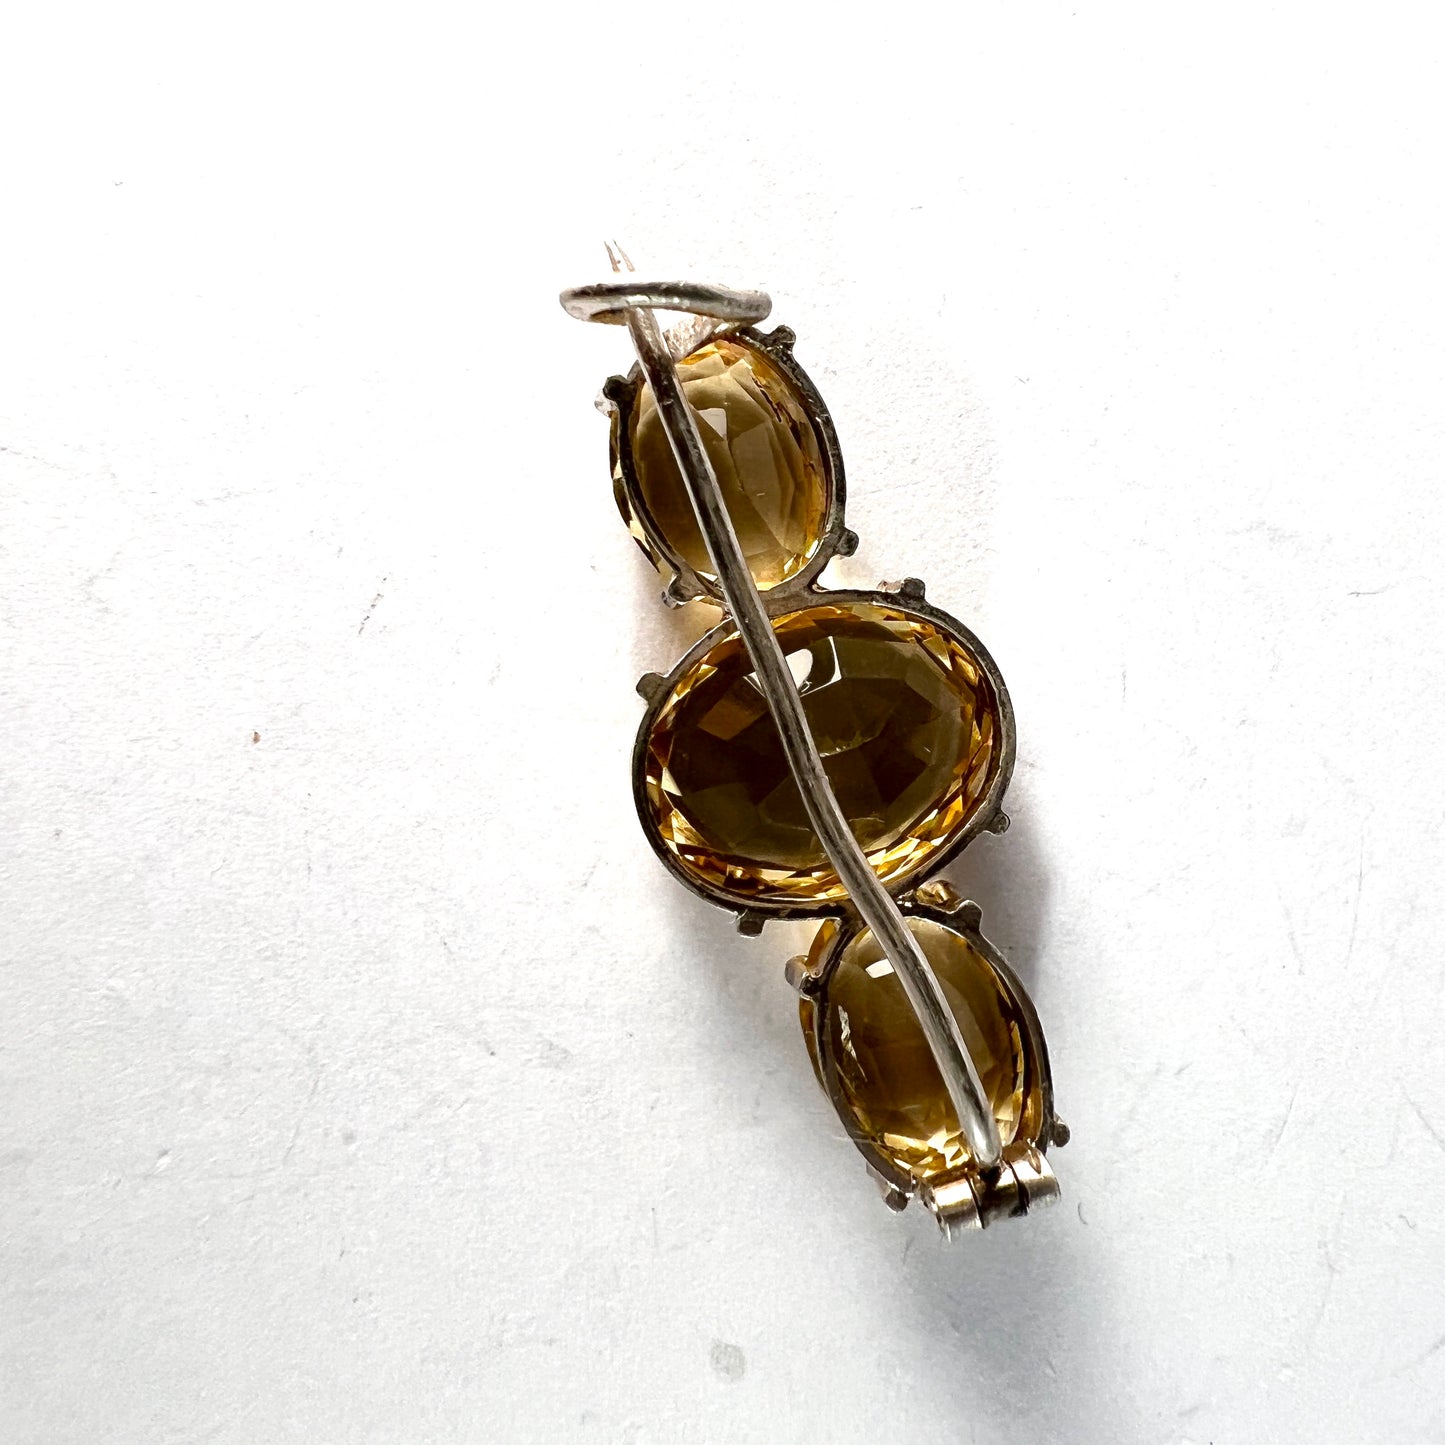 Sweden c year 1900. Antique Solid Silver Citrine Brooch Pin.